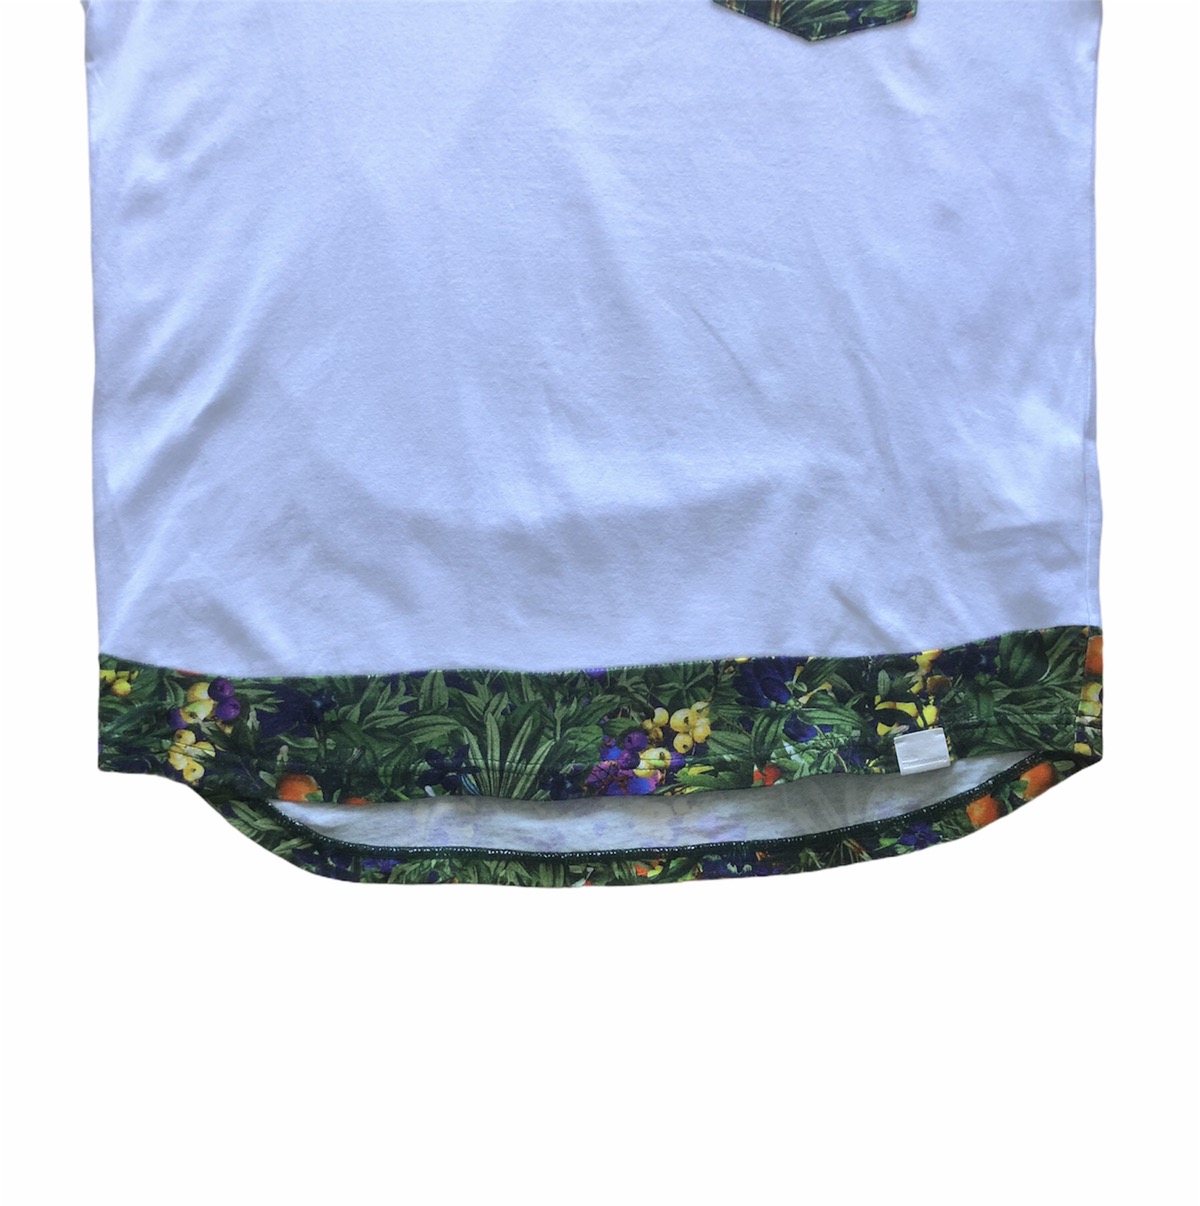 Attached Fabric Floral motif Pocket t shirt - 2